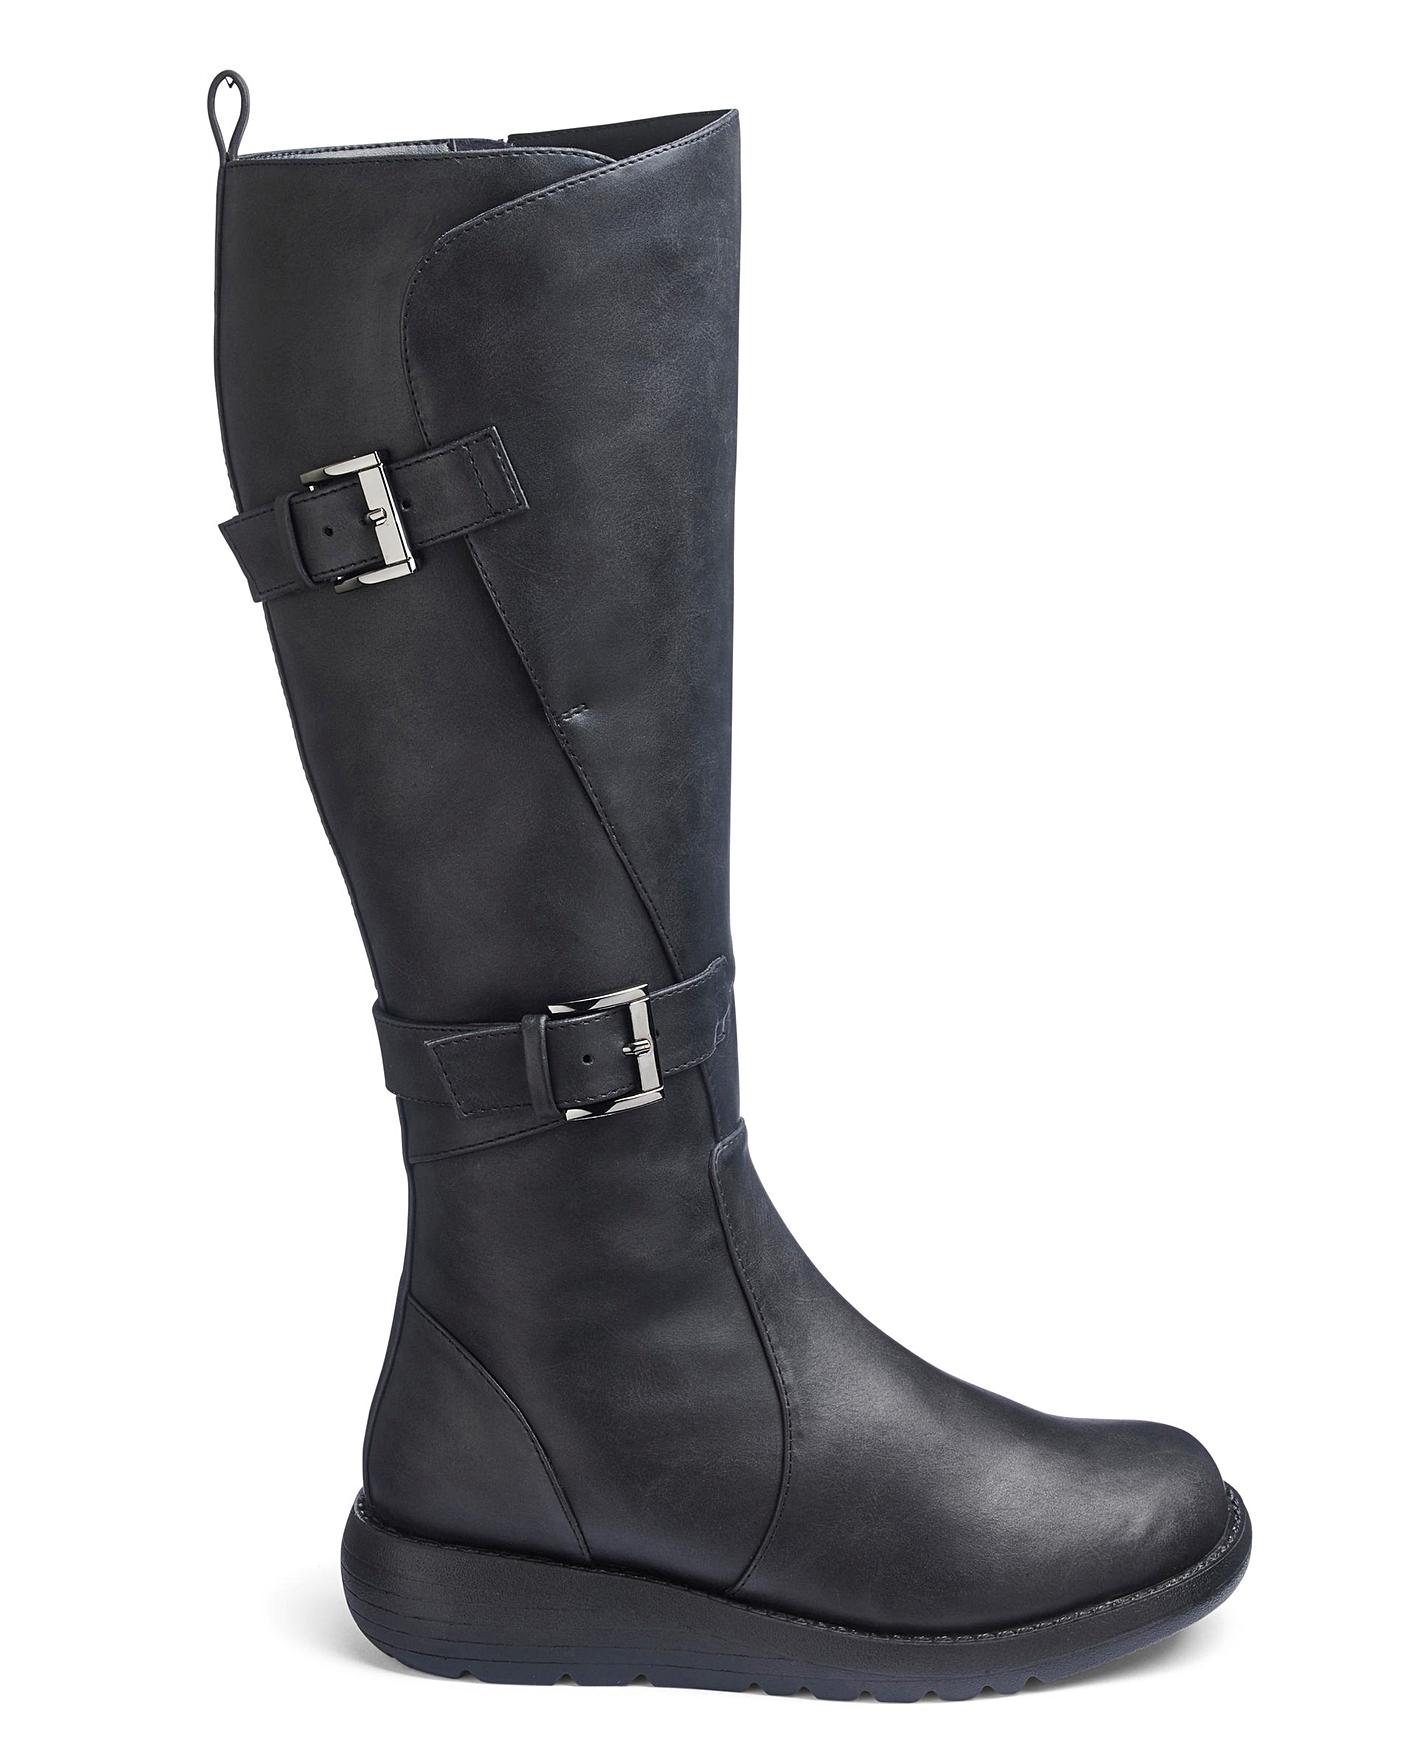 Double Buckle Boots E Fit Curvy Calf 